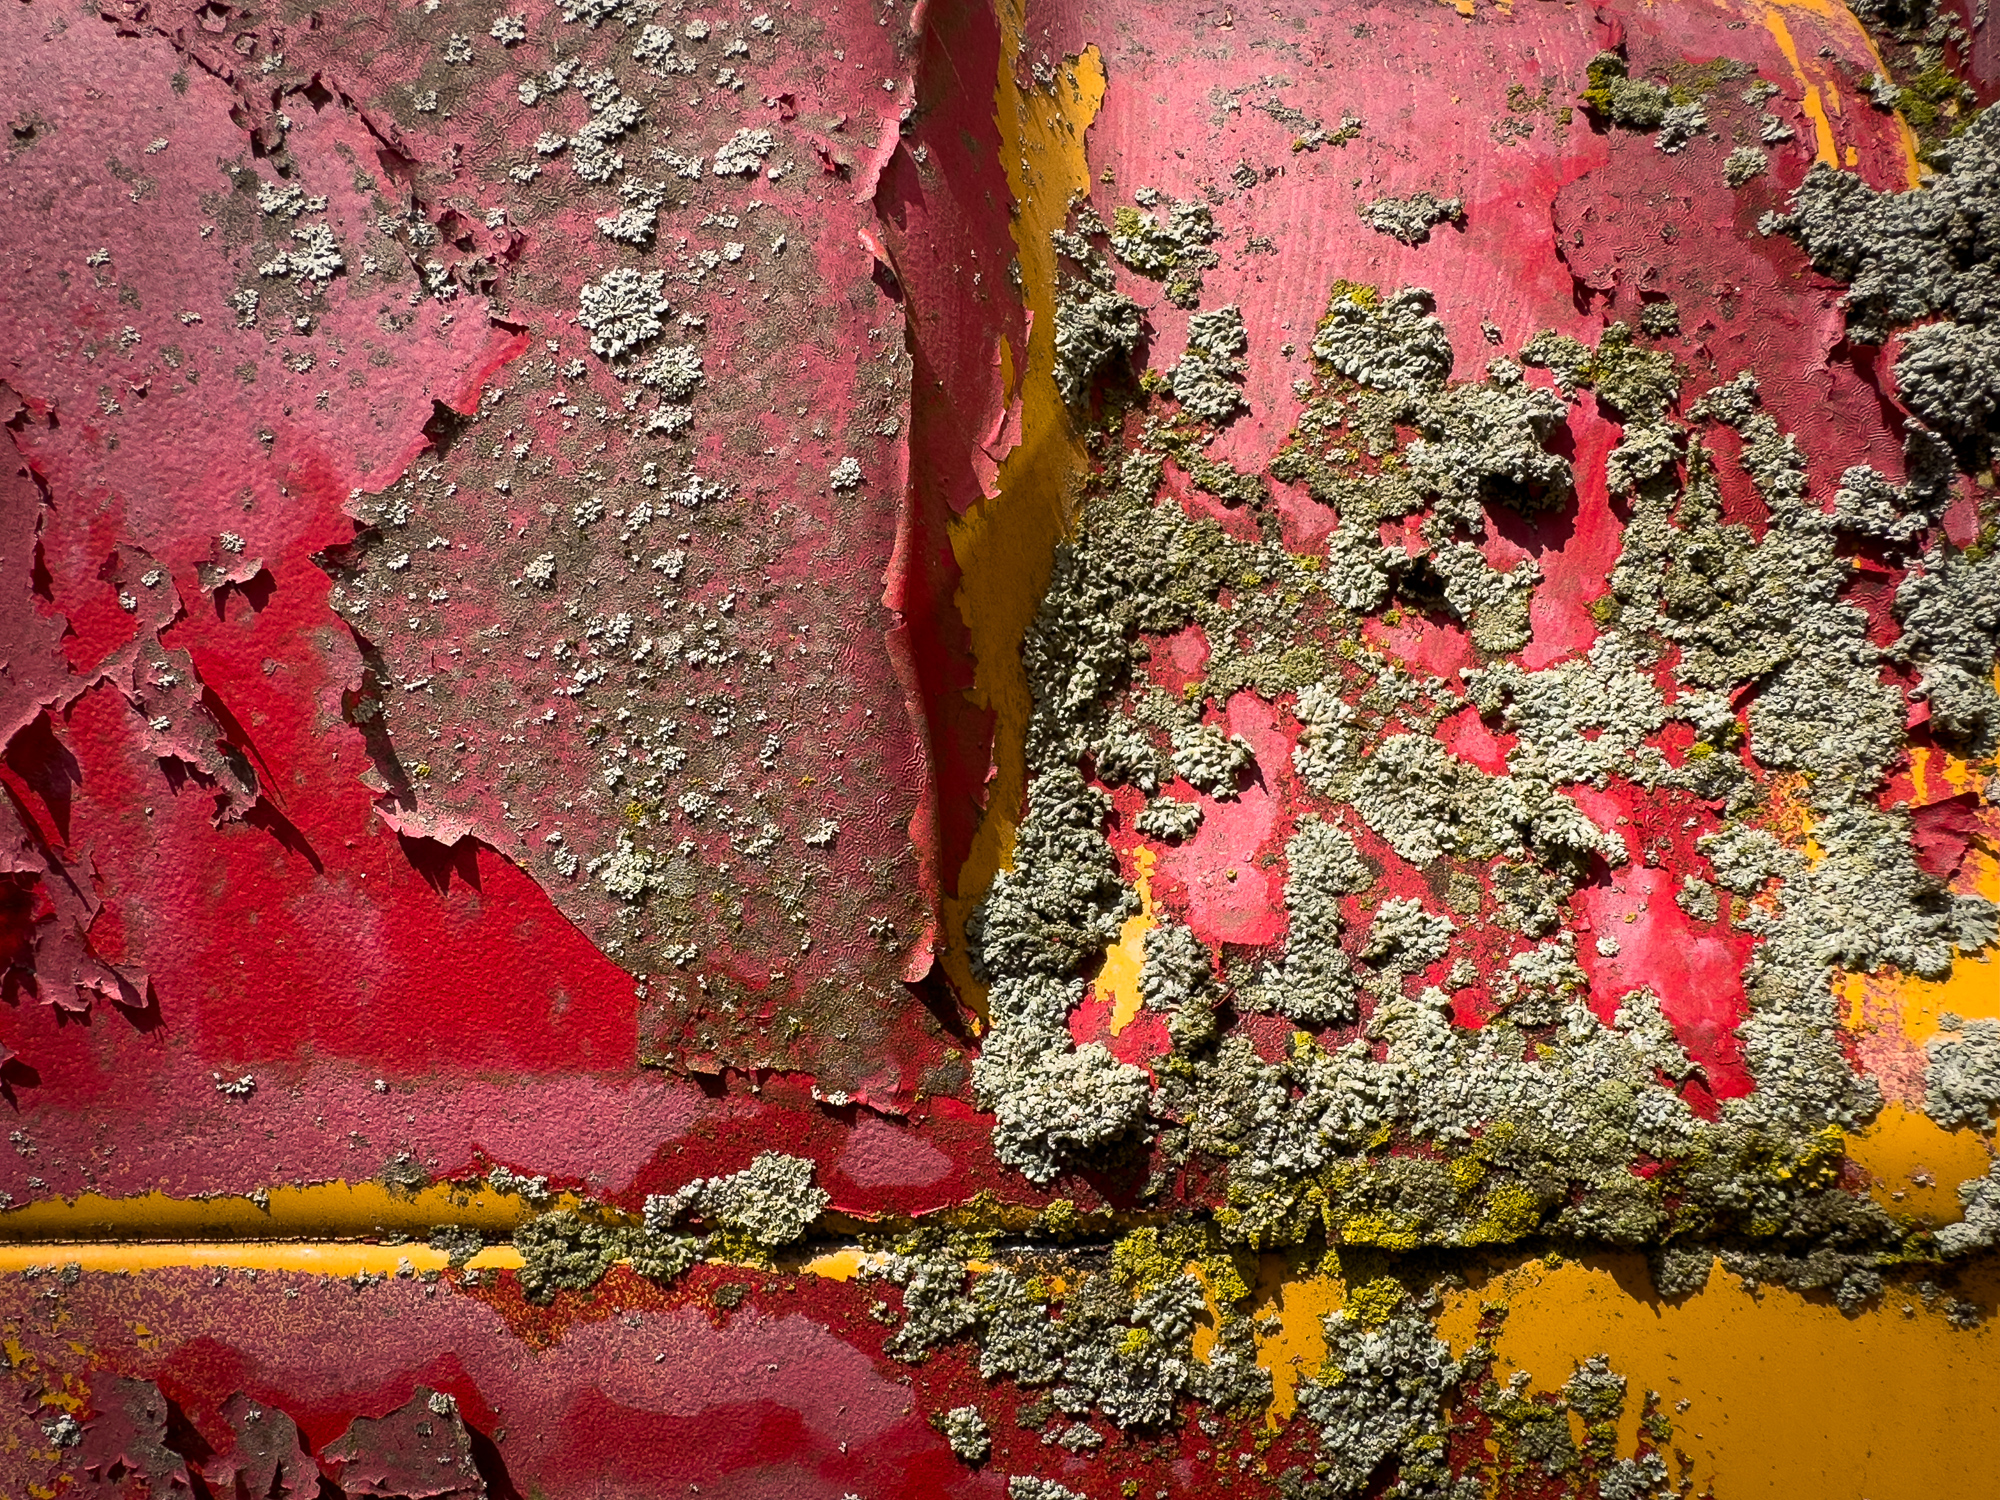 Texture and color gave me an interesting image.